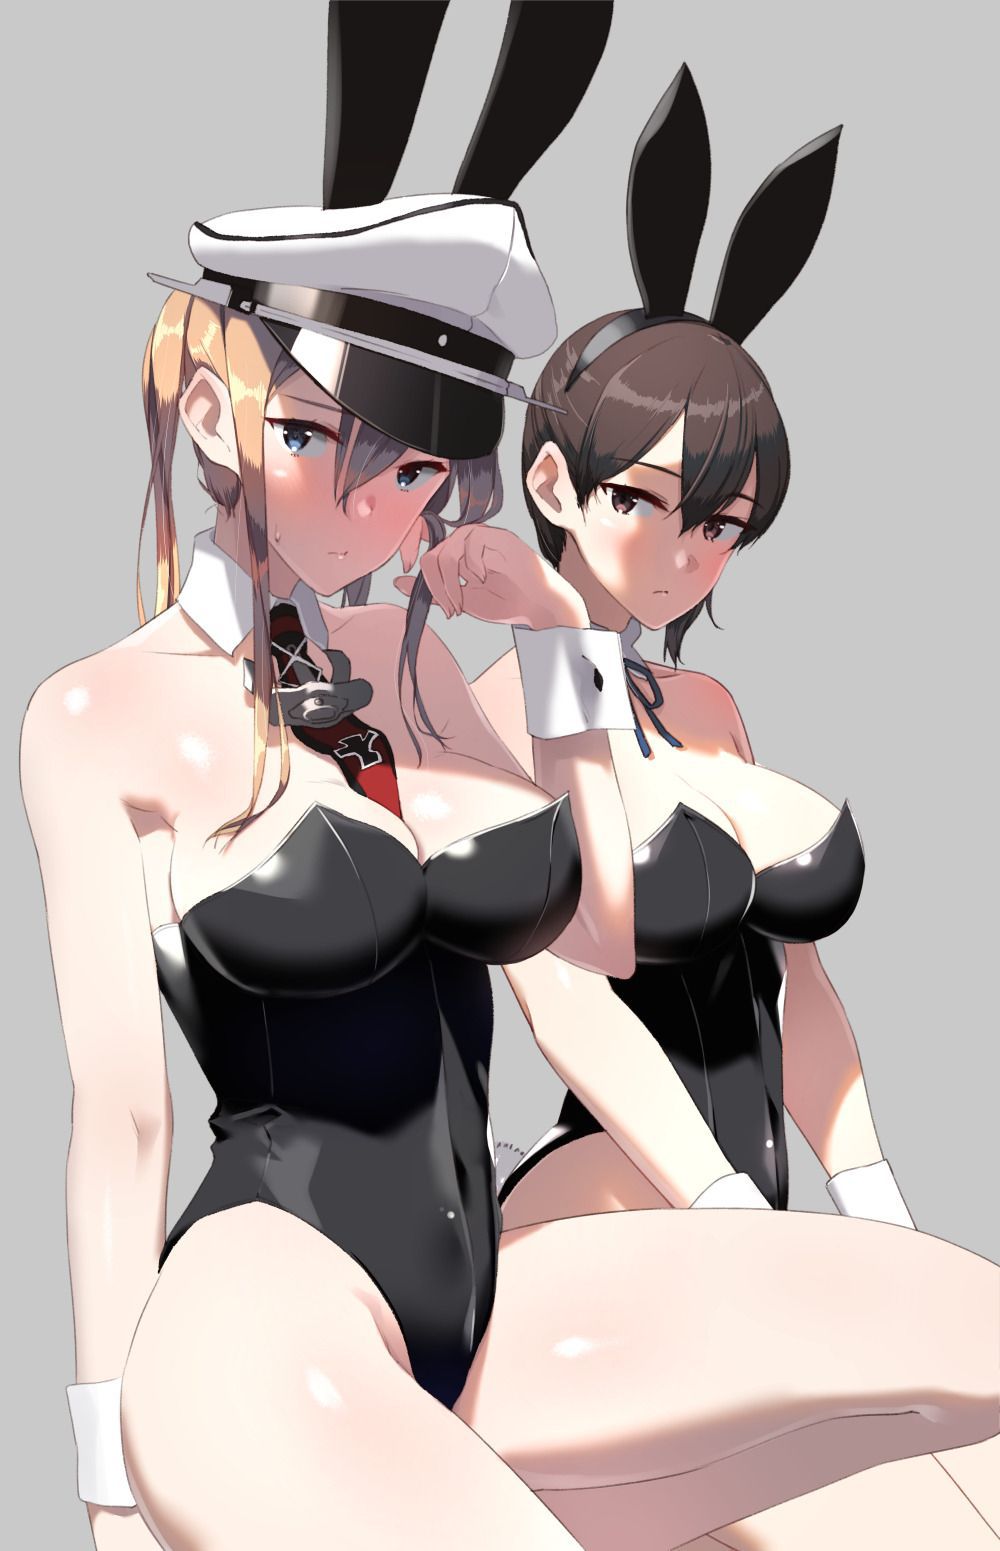 [Second] sexy bunny girl figure secondary erotic image part 32 [Bunny Girl] 35